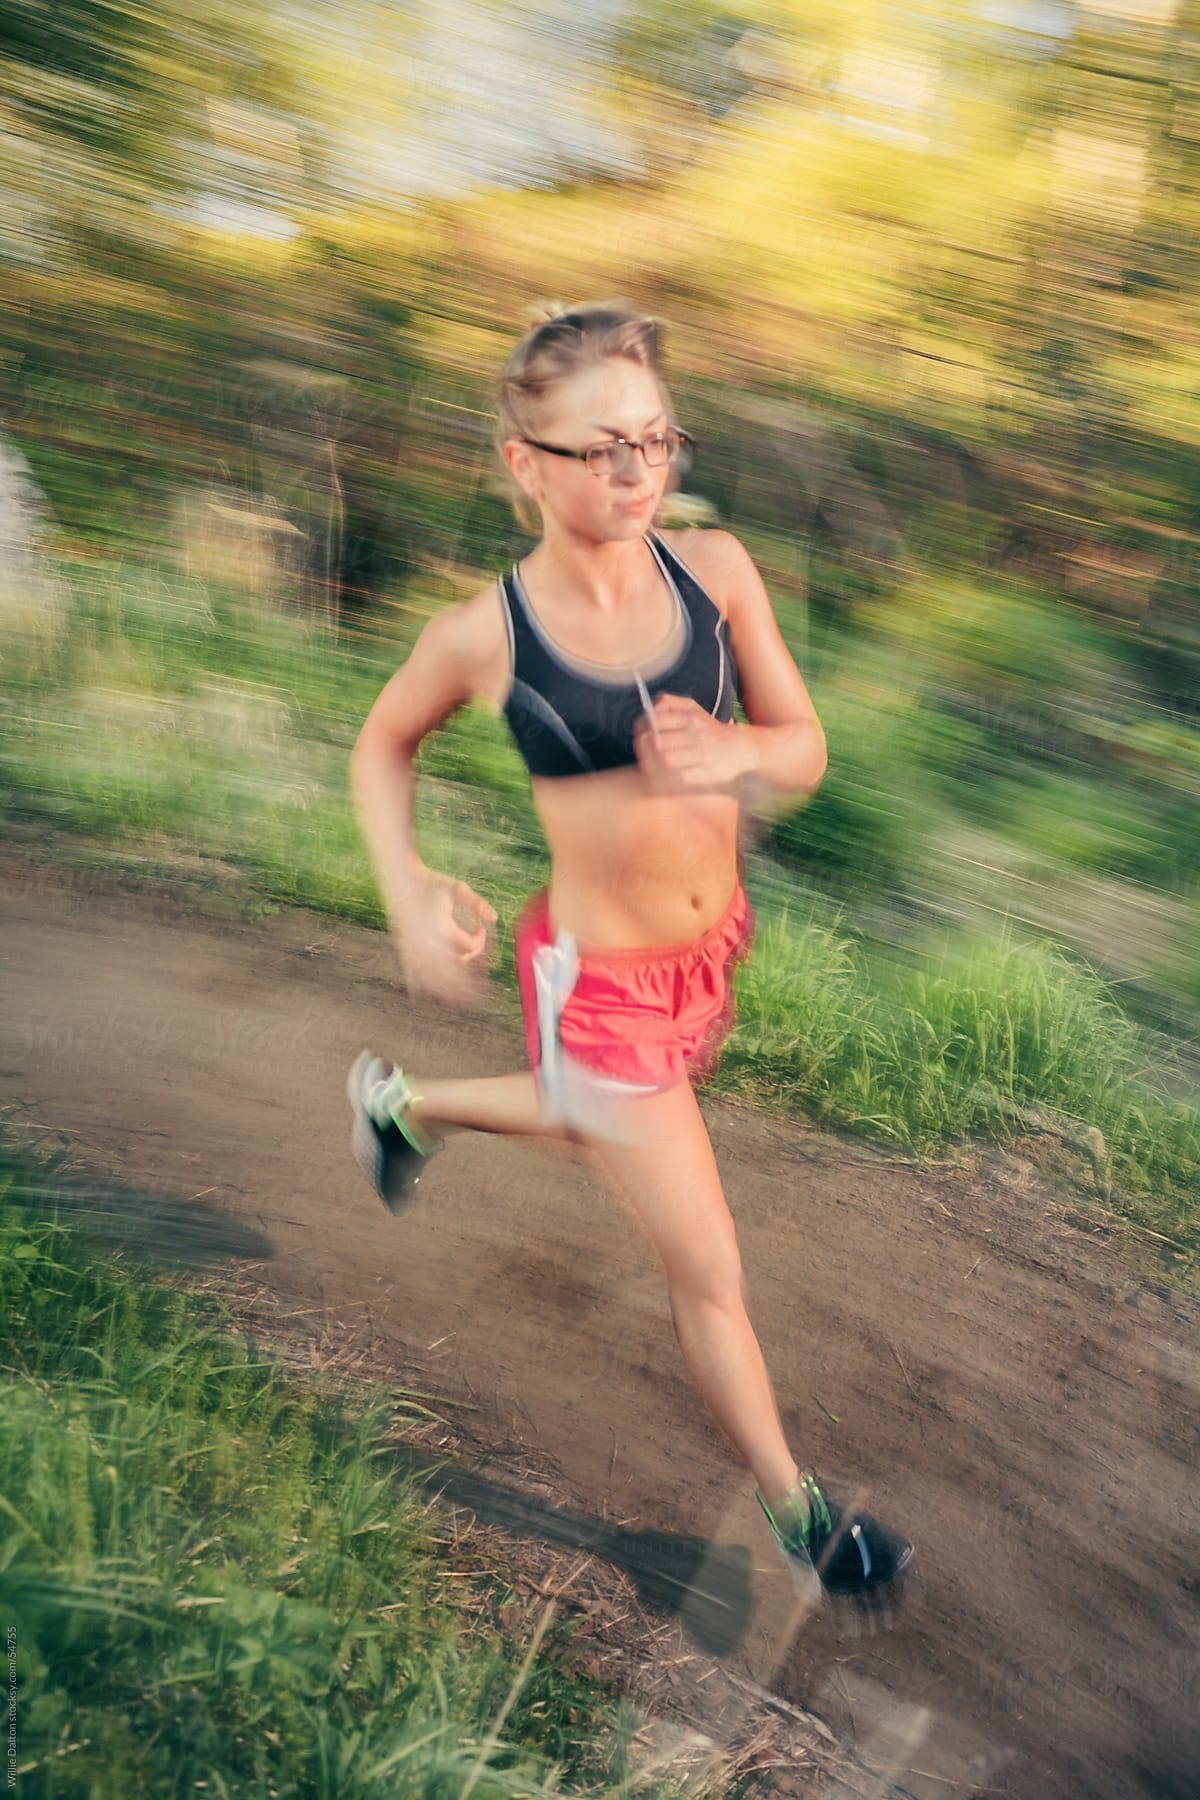 Panning With a Woman Running on a Dirt Trail